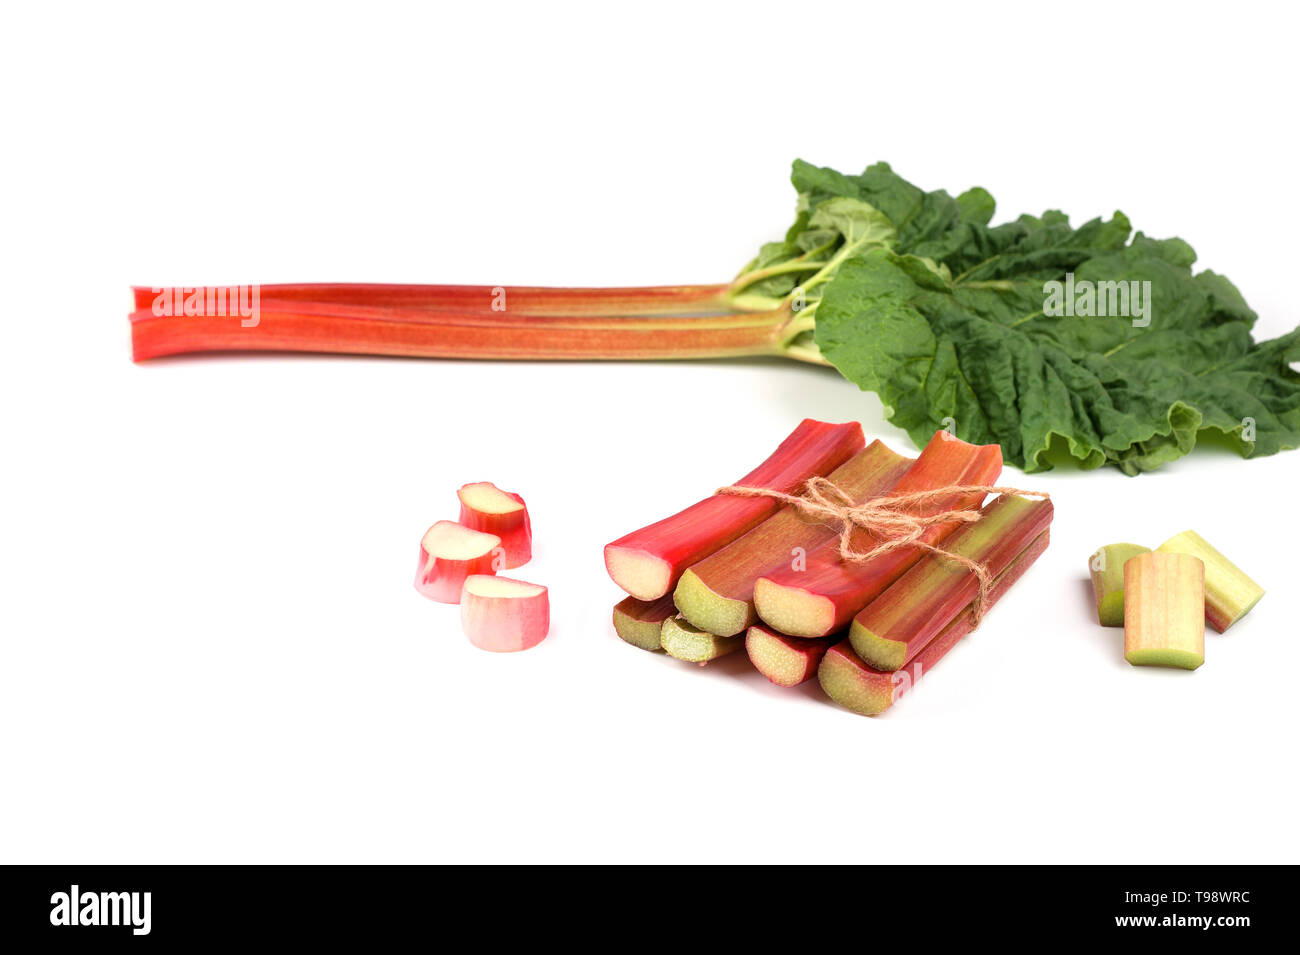 Rhubarb isolated. Red stalks, bunch of cut rhubarb  on white background.Fresh and juicy ready to be cooked.Image with  selective focus and copy space. Stock Photo